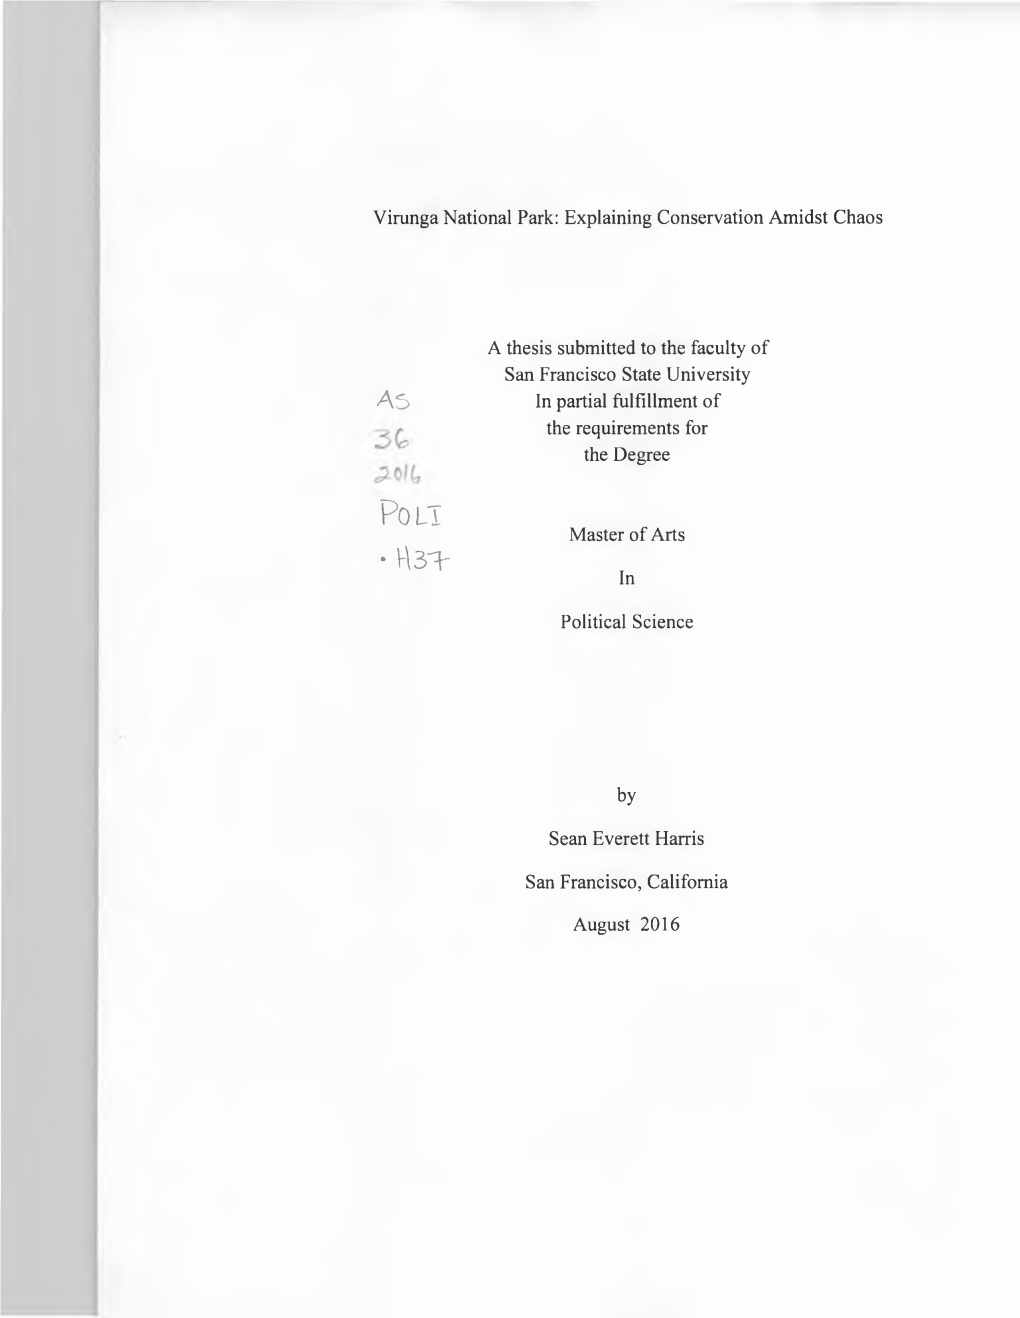 Chapter 3: Effects of State Failure on Conservation in Virunga National Park